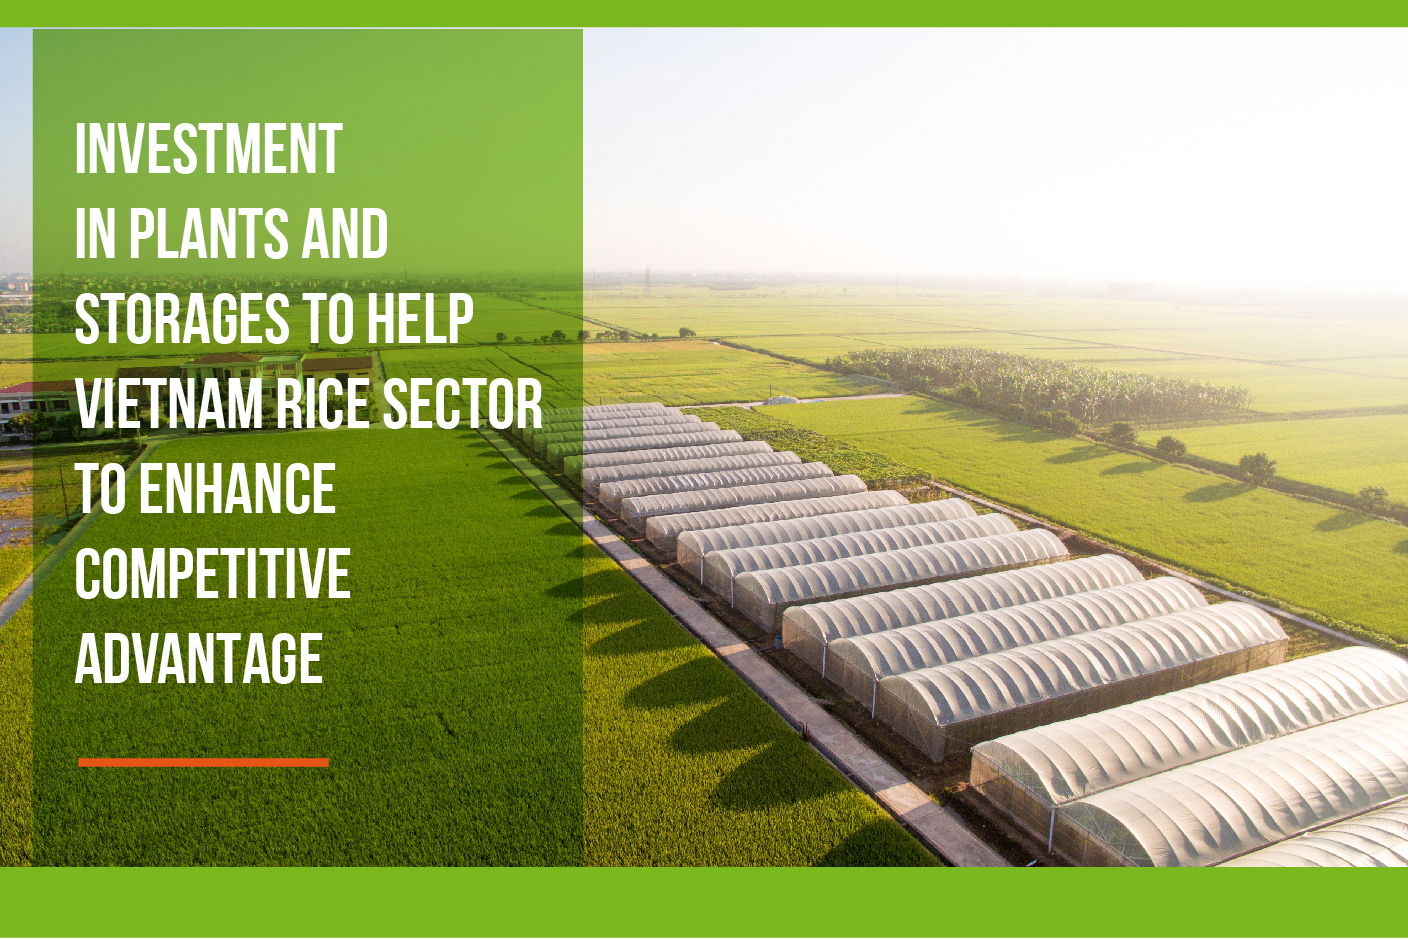 INVESTMENT IN PLANTS AND STORAGES TO HELP VIETNAM RICE SECTOR TO ENHANCE COMPETITIVE ADVANTAGE